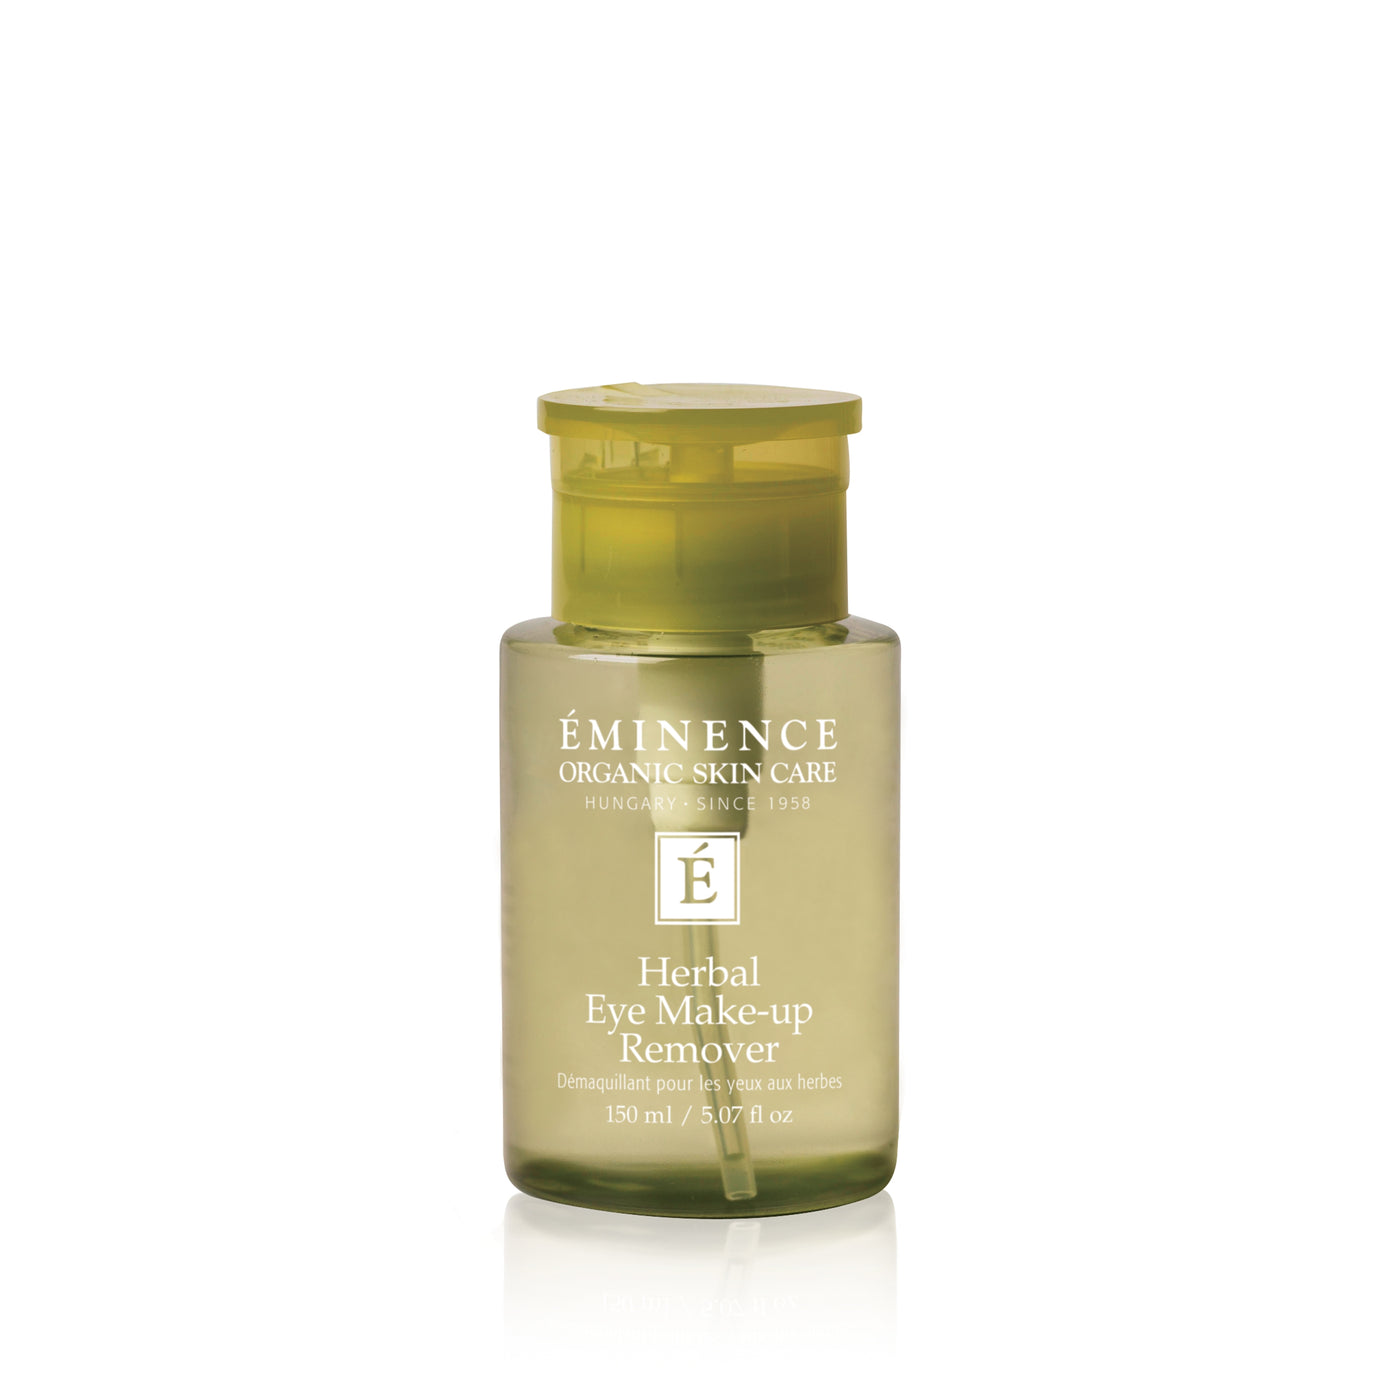 Eminence Organics Herbal Eye Make-up Remover - Radiance Clean Beauty